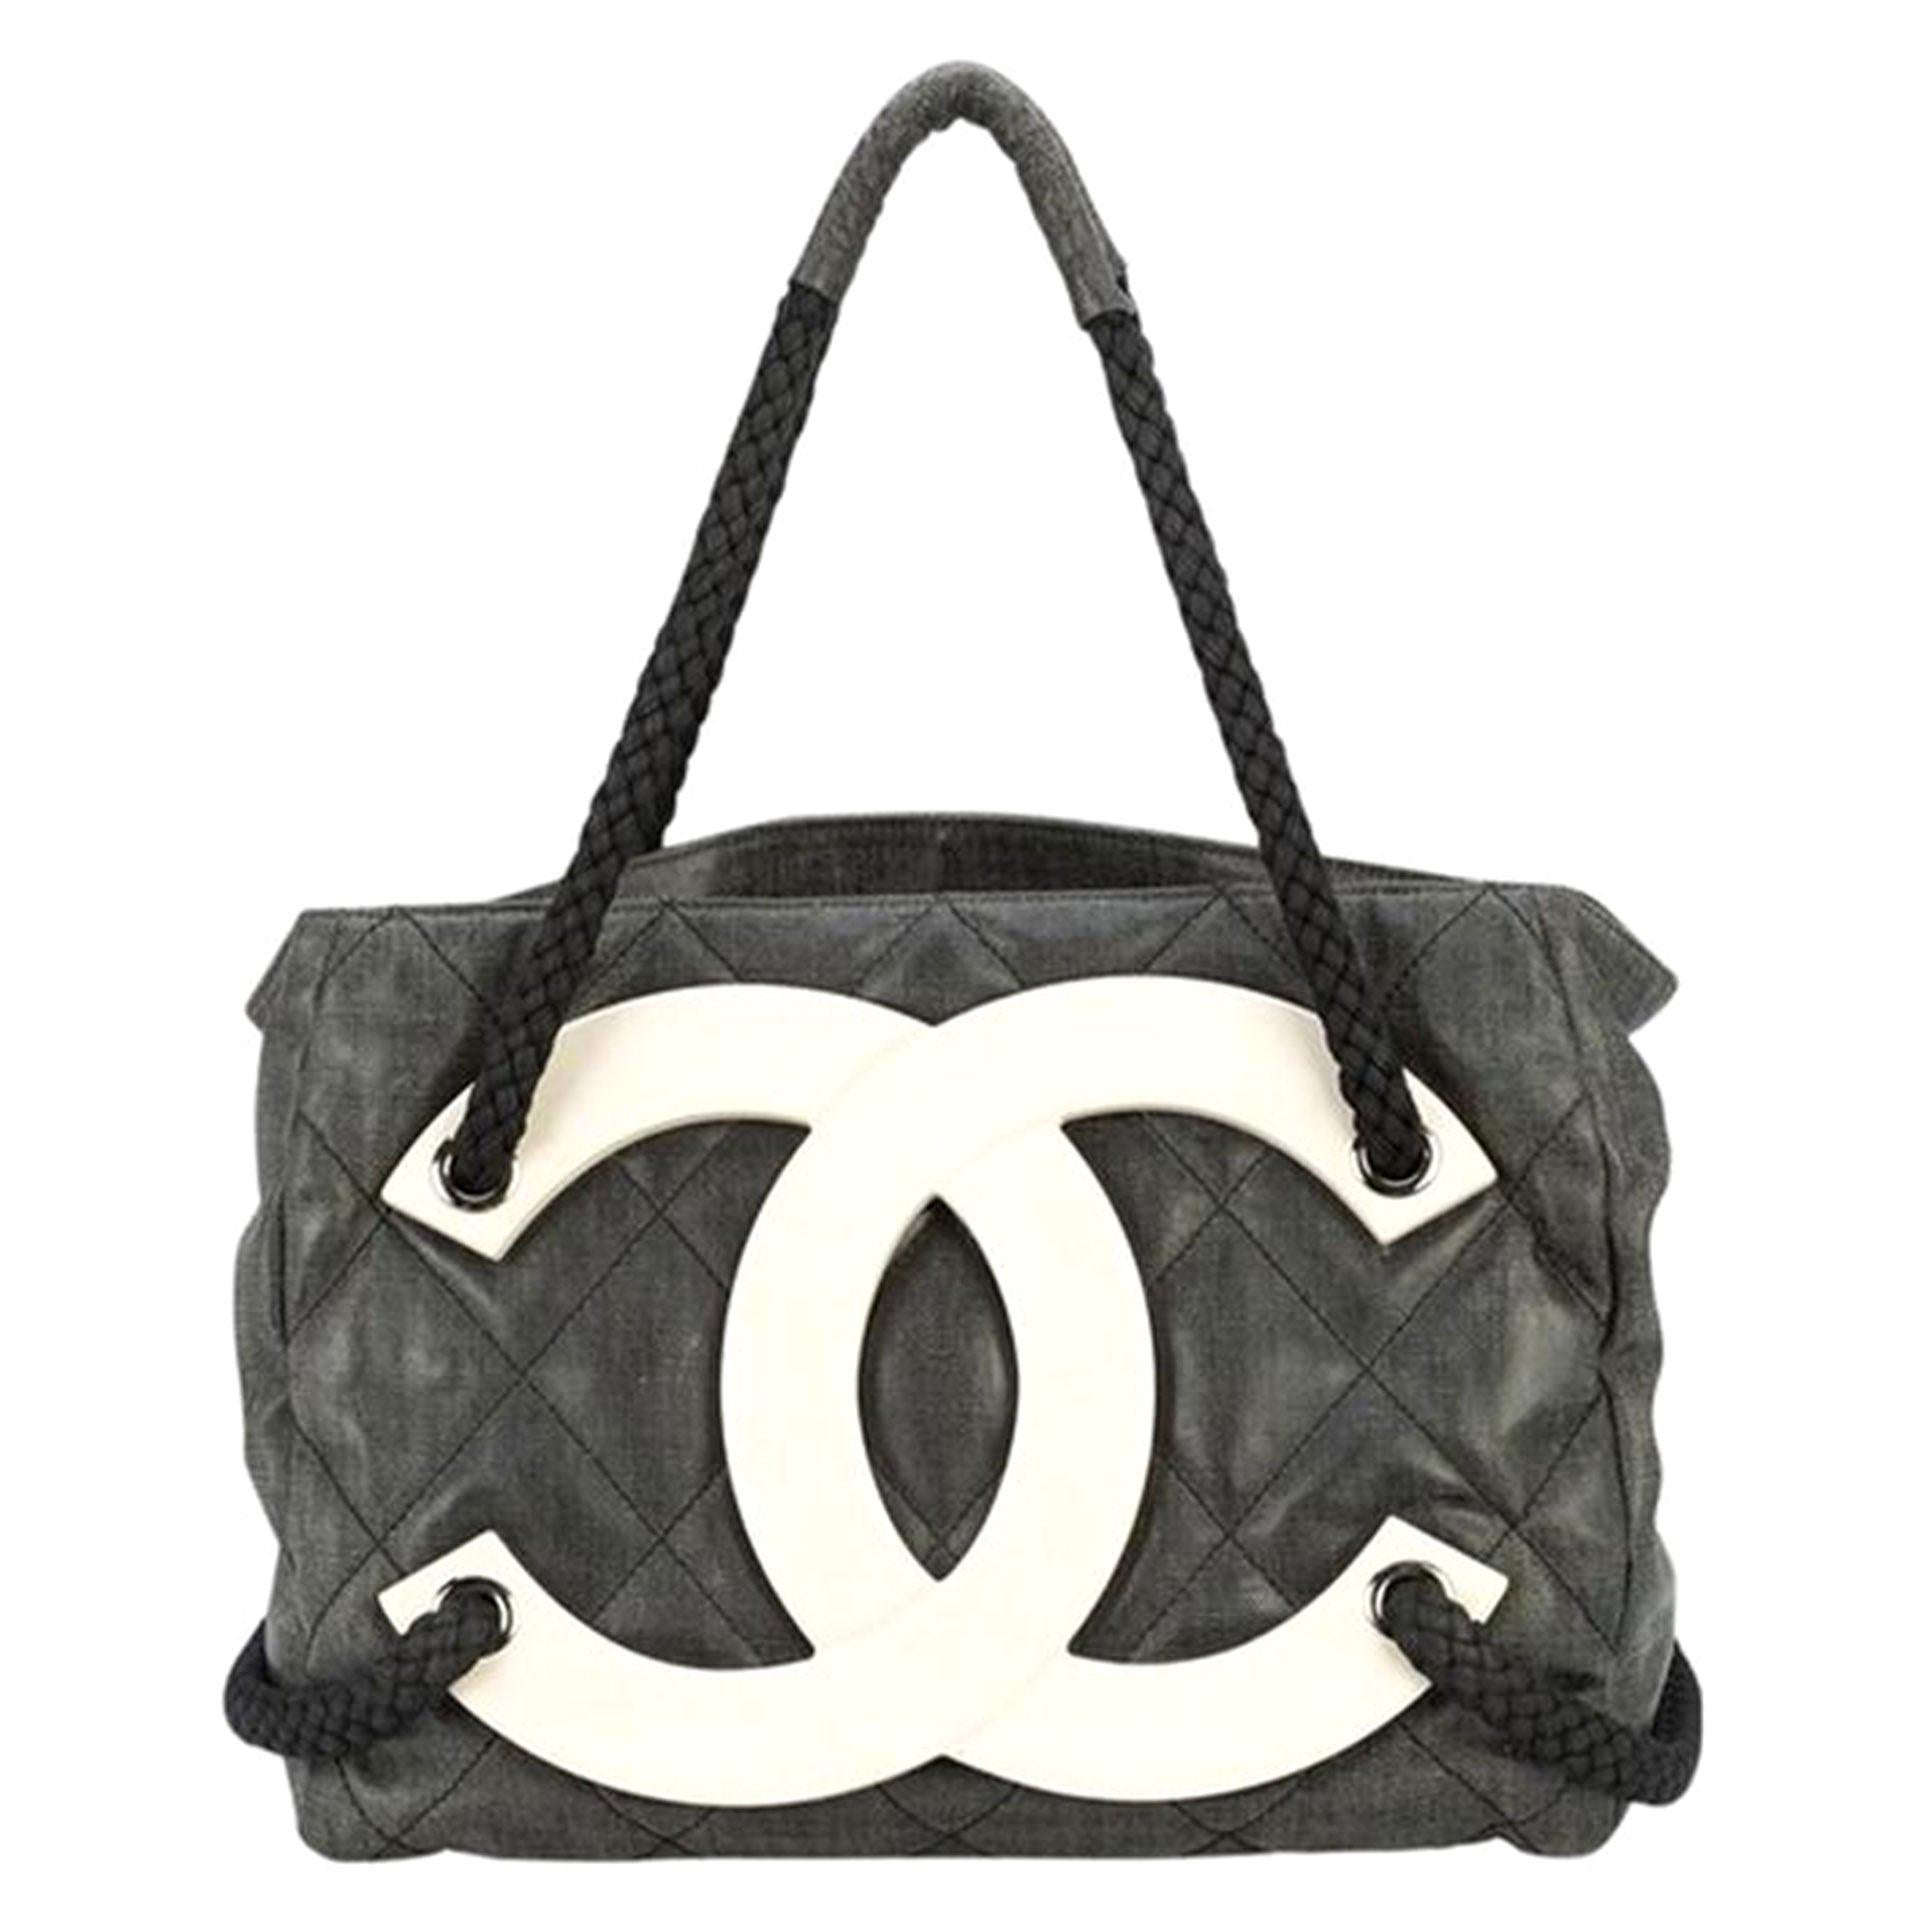 Chanel Limited Edition Cruise Yacht Nautical Beach Black Coated Canvas Tote